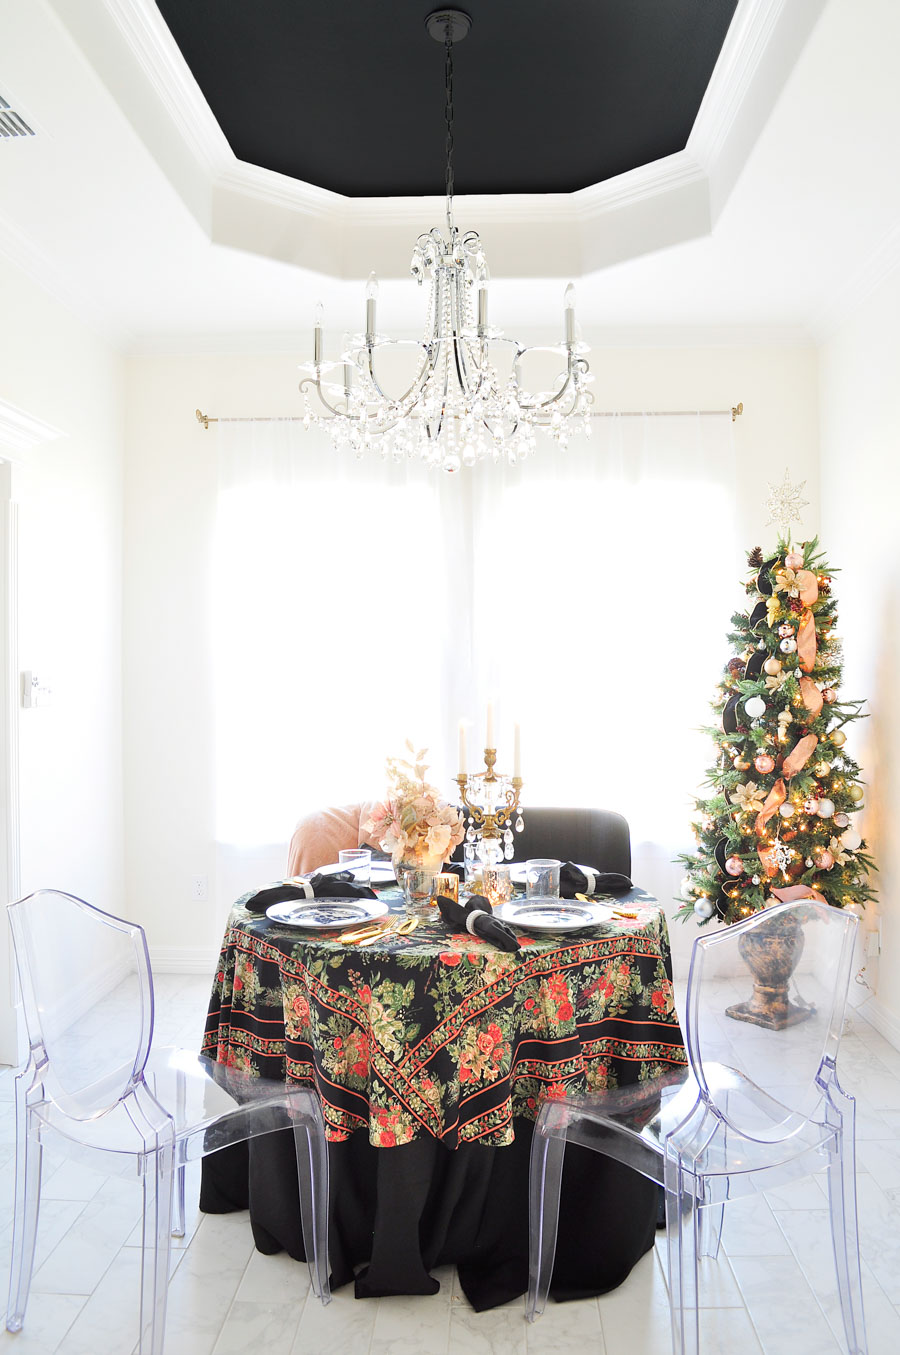 A small dining area or breakfast nook gets glammed up for the holidays with touches of blush, gold, and silver, plus florals and chinoiserie and vintage home decor elements.